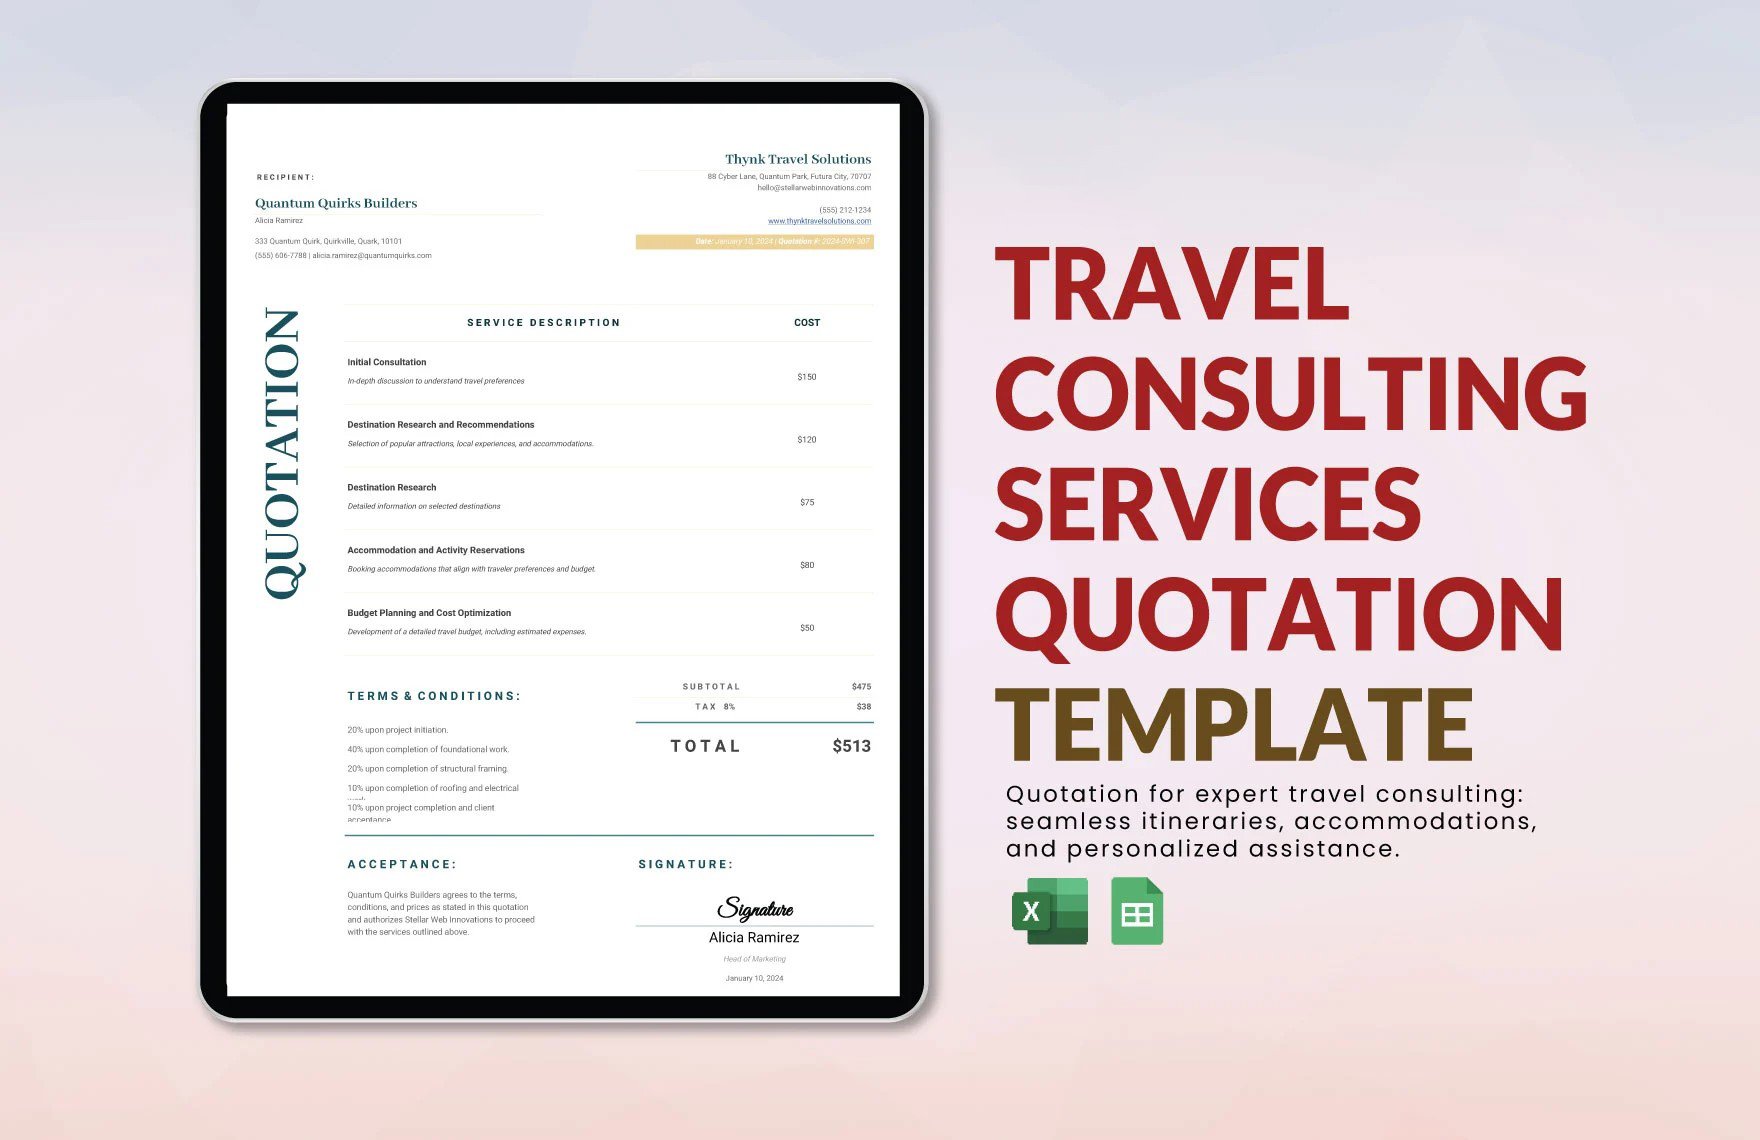 Free Travel Consulting Services Quotation Template